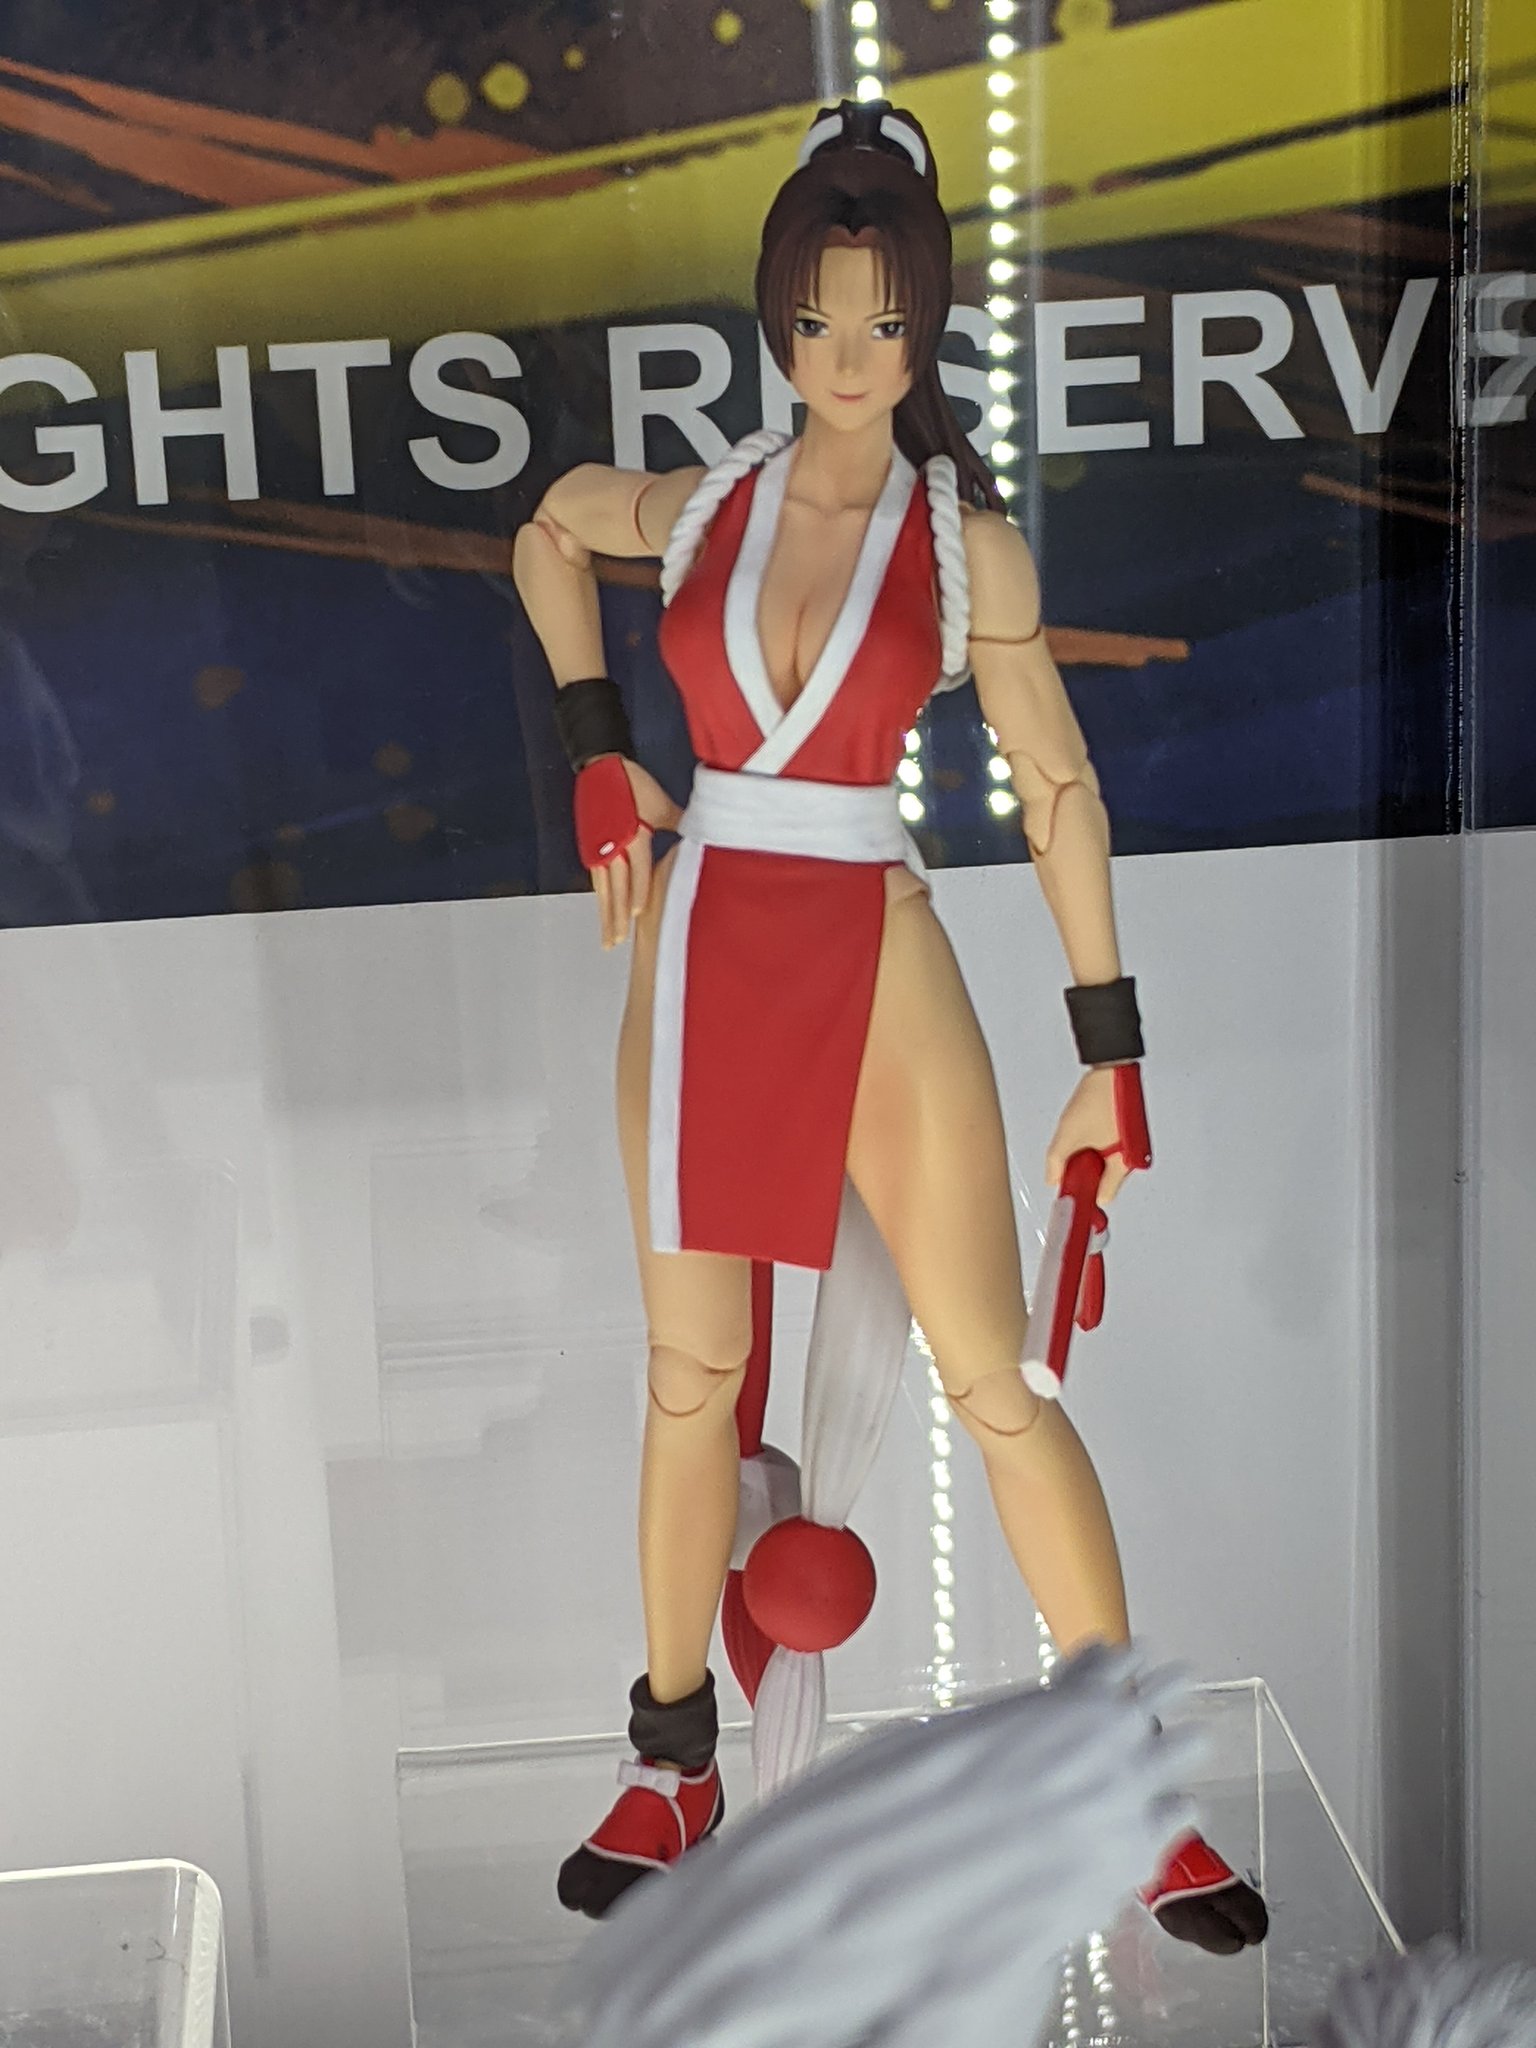 JURI HAN - Street Fighter V Action Fighter – Storm Collectibles